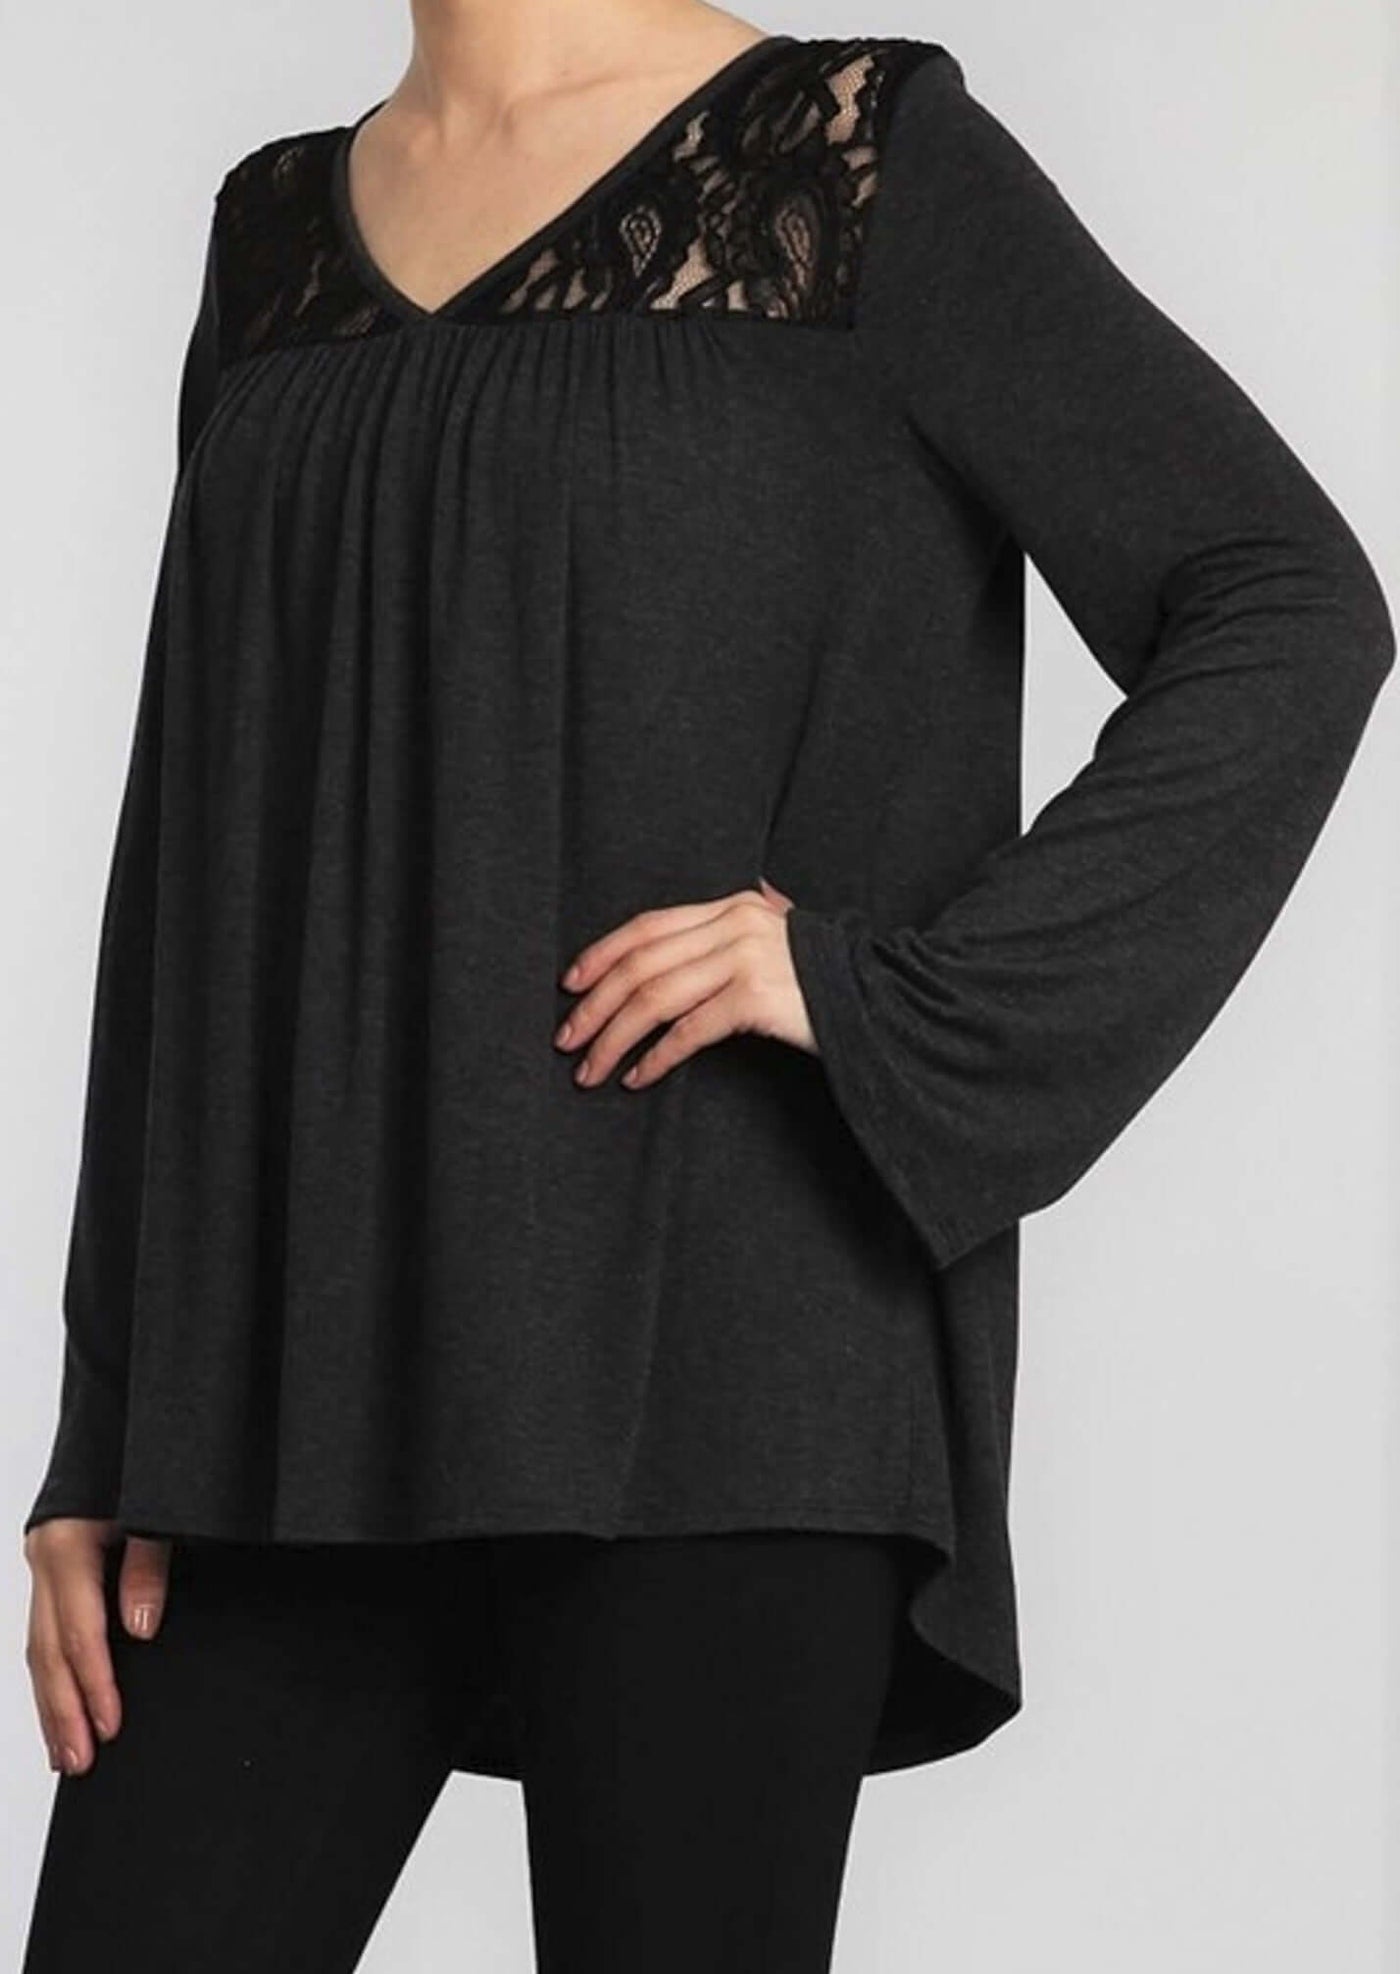 Chatoyant Heather Black Long Bell Sleeve Top with Lace Panels at Shoulders.  Made in the USA & Sold by Classy Cozy Cool Women's Boutique